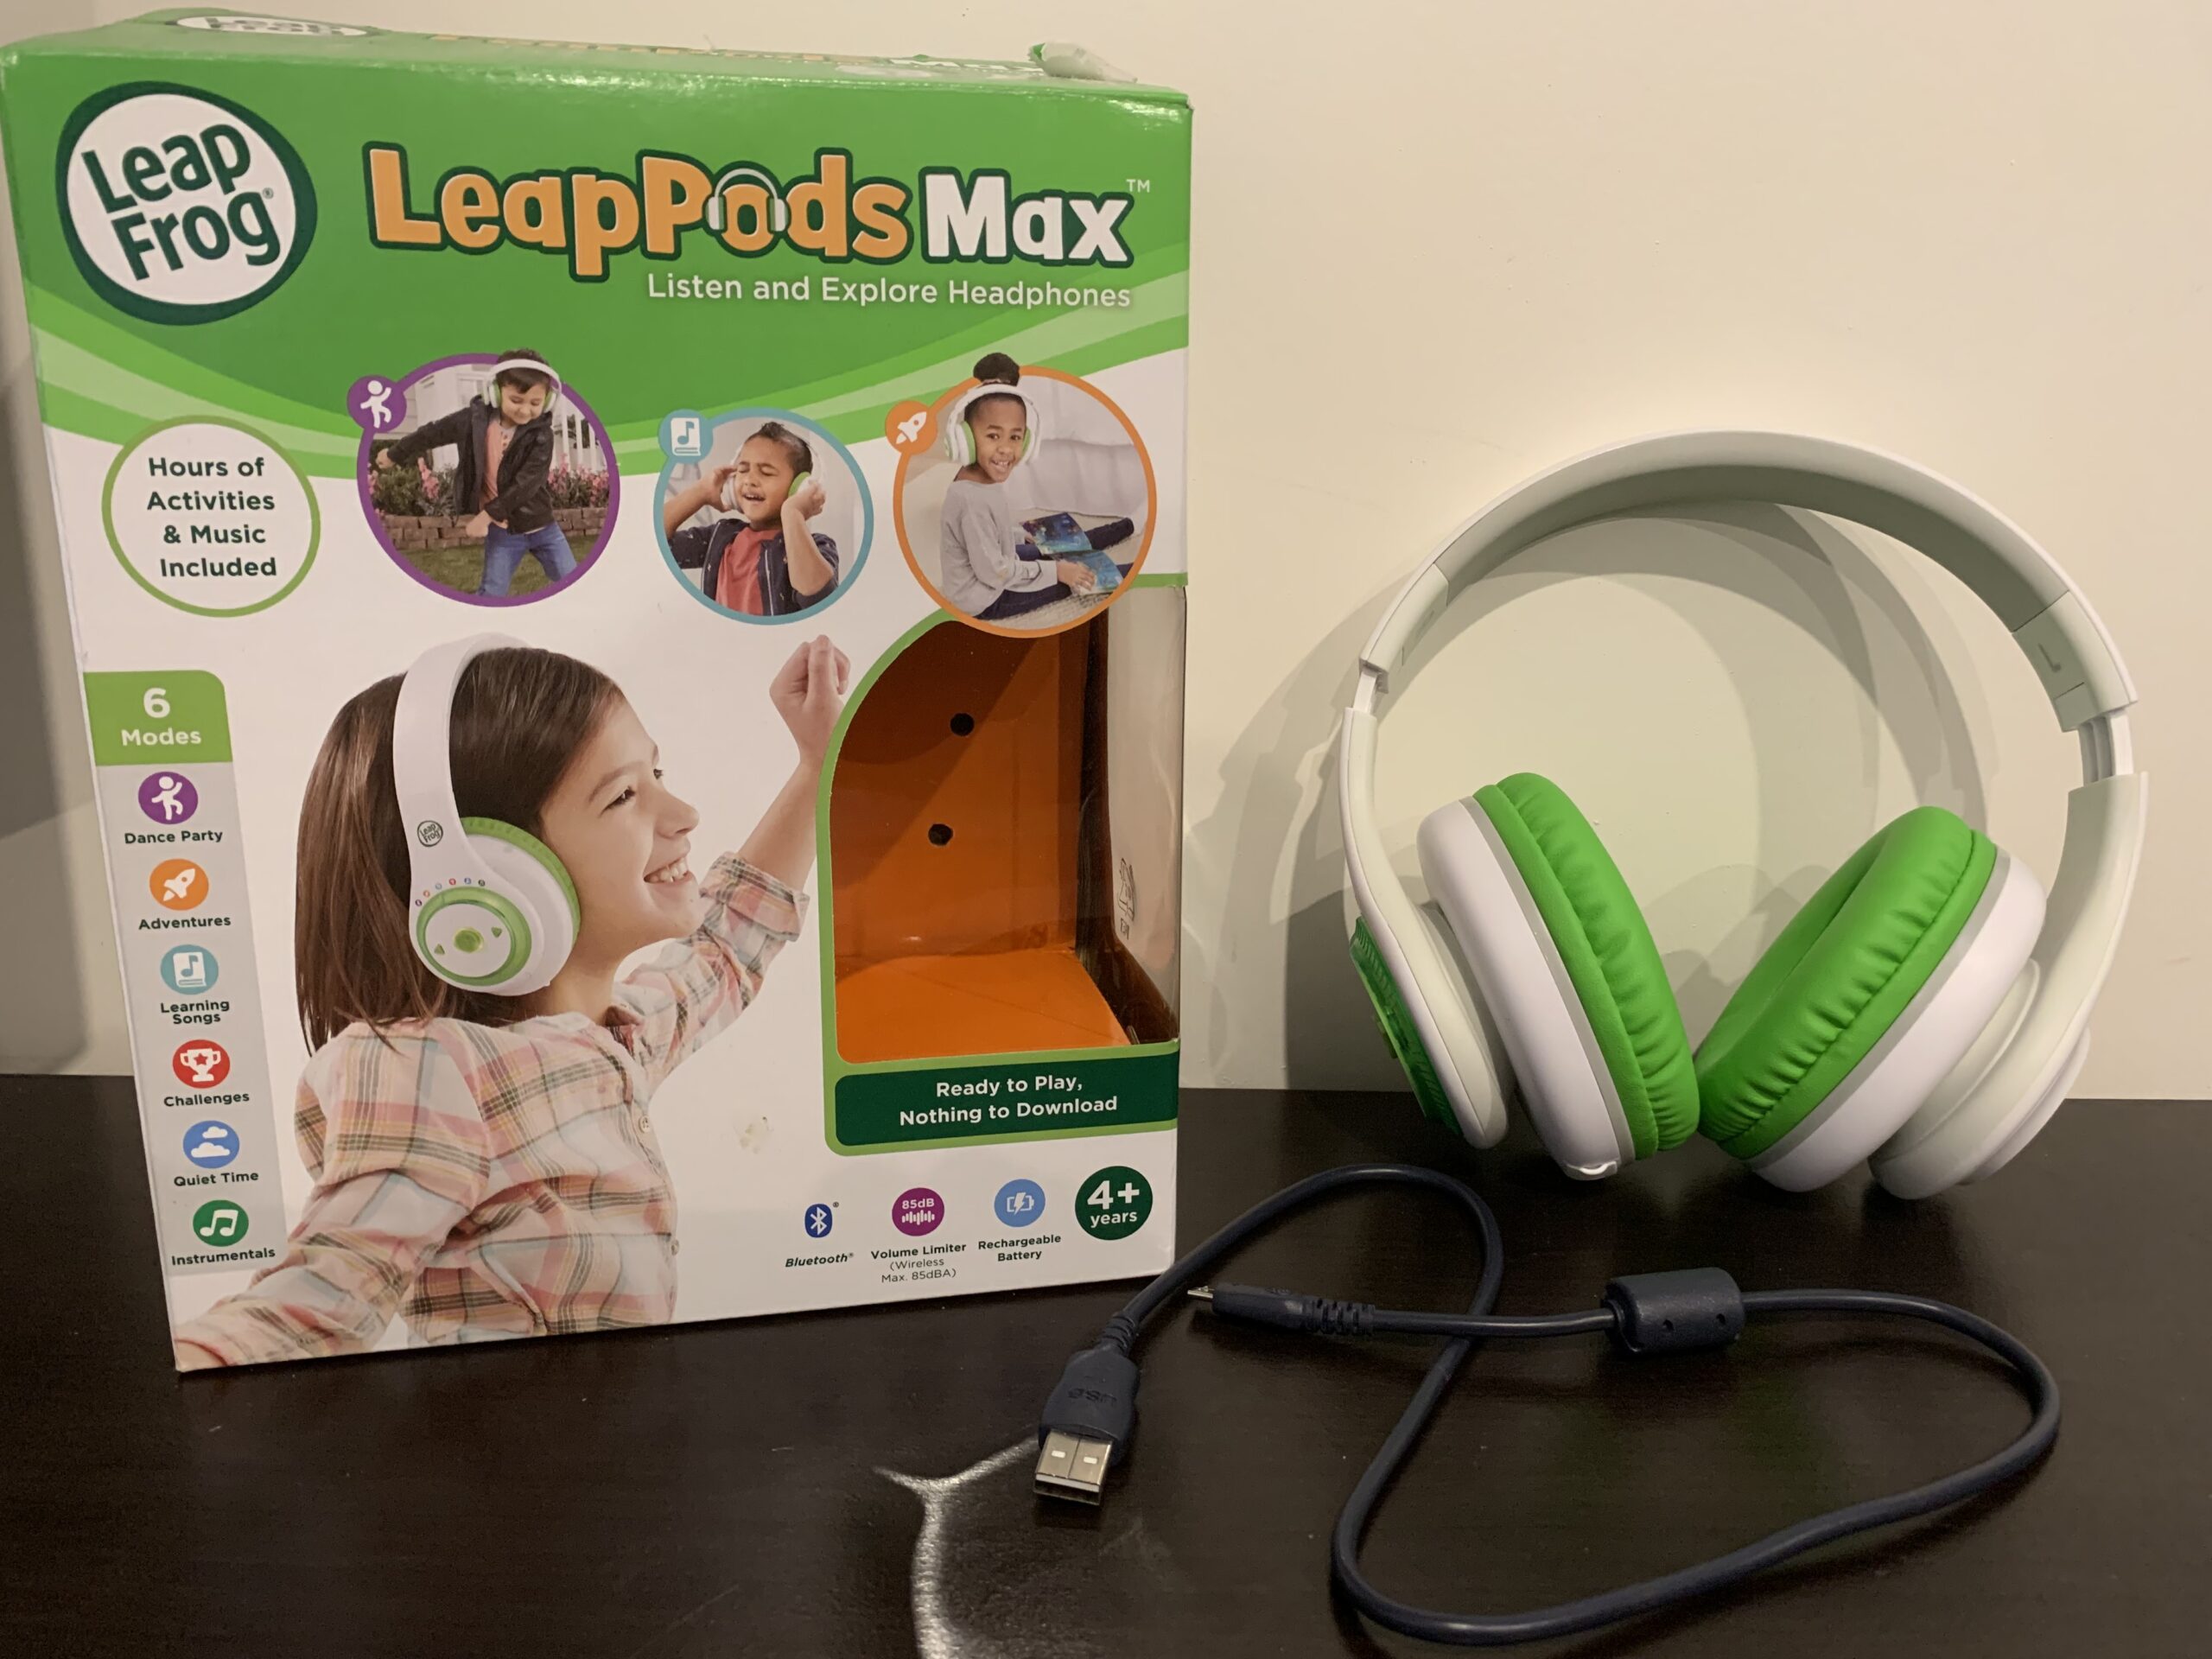 Leap Frog LeapPods Max kids interactive headphones review | Best